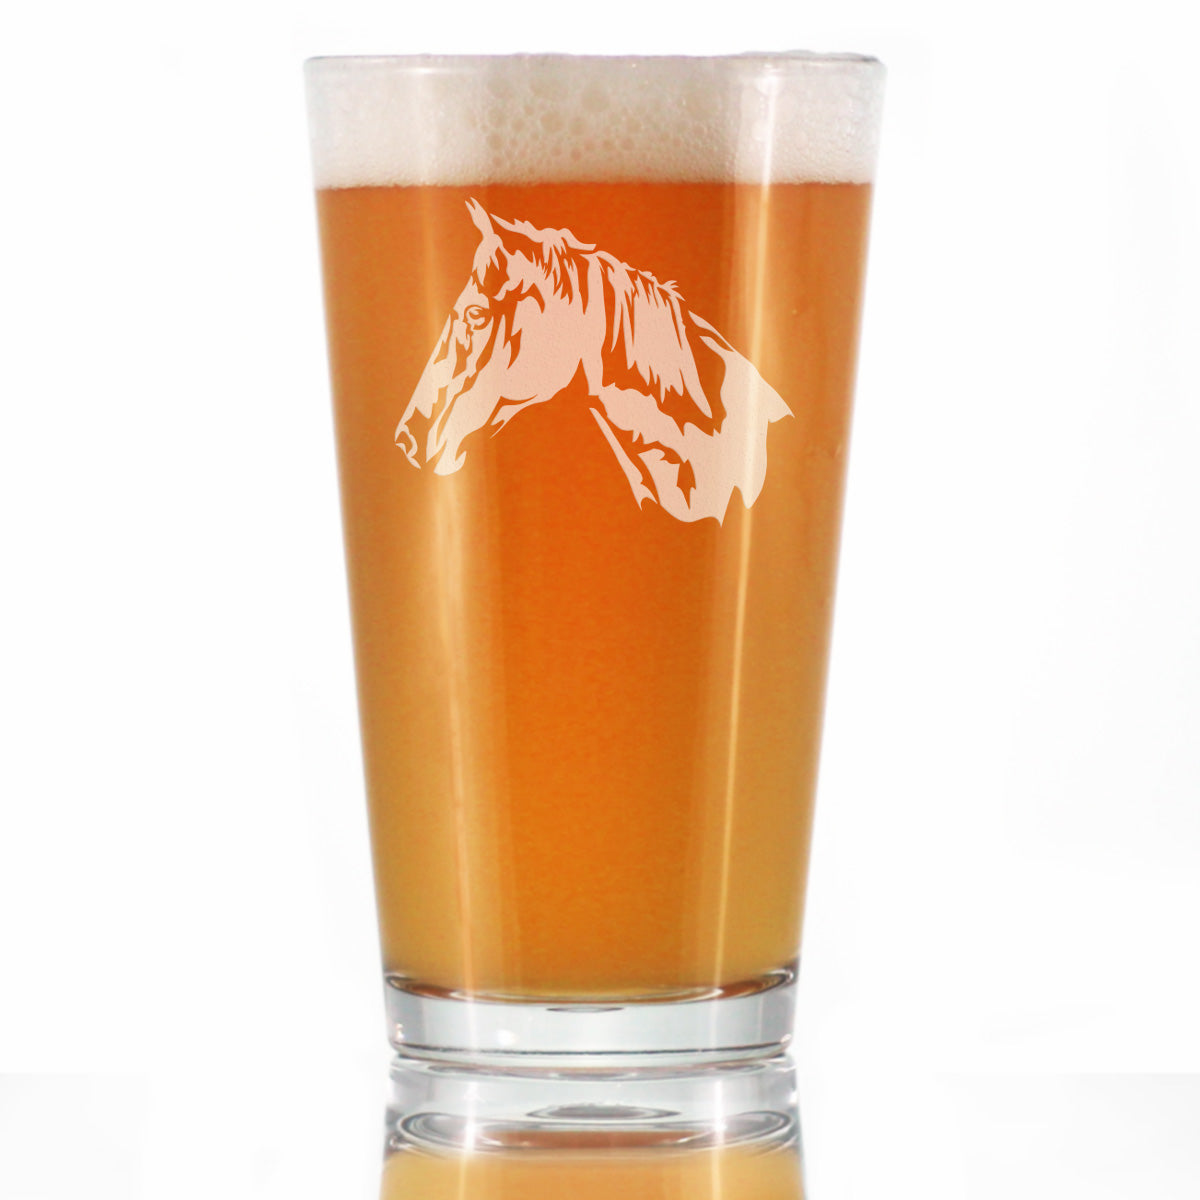 Horse Face Pint Glass for Beer - Western Themed Farm Decor and Gifts for Horseback Riders - 16 Oz Glasses